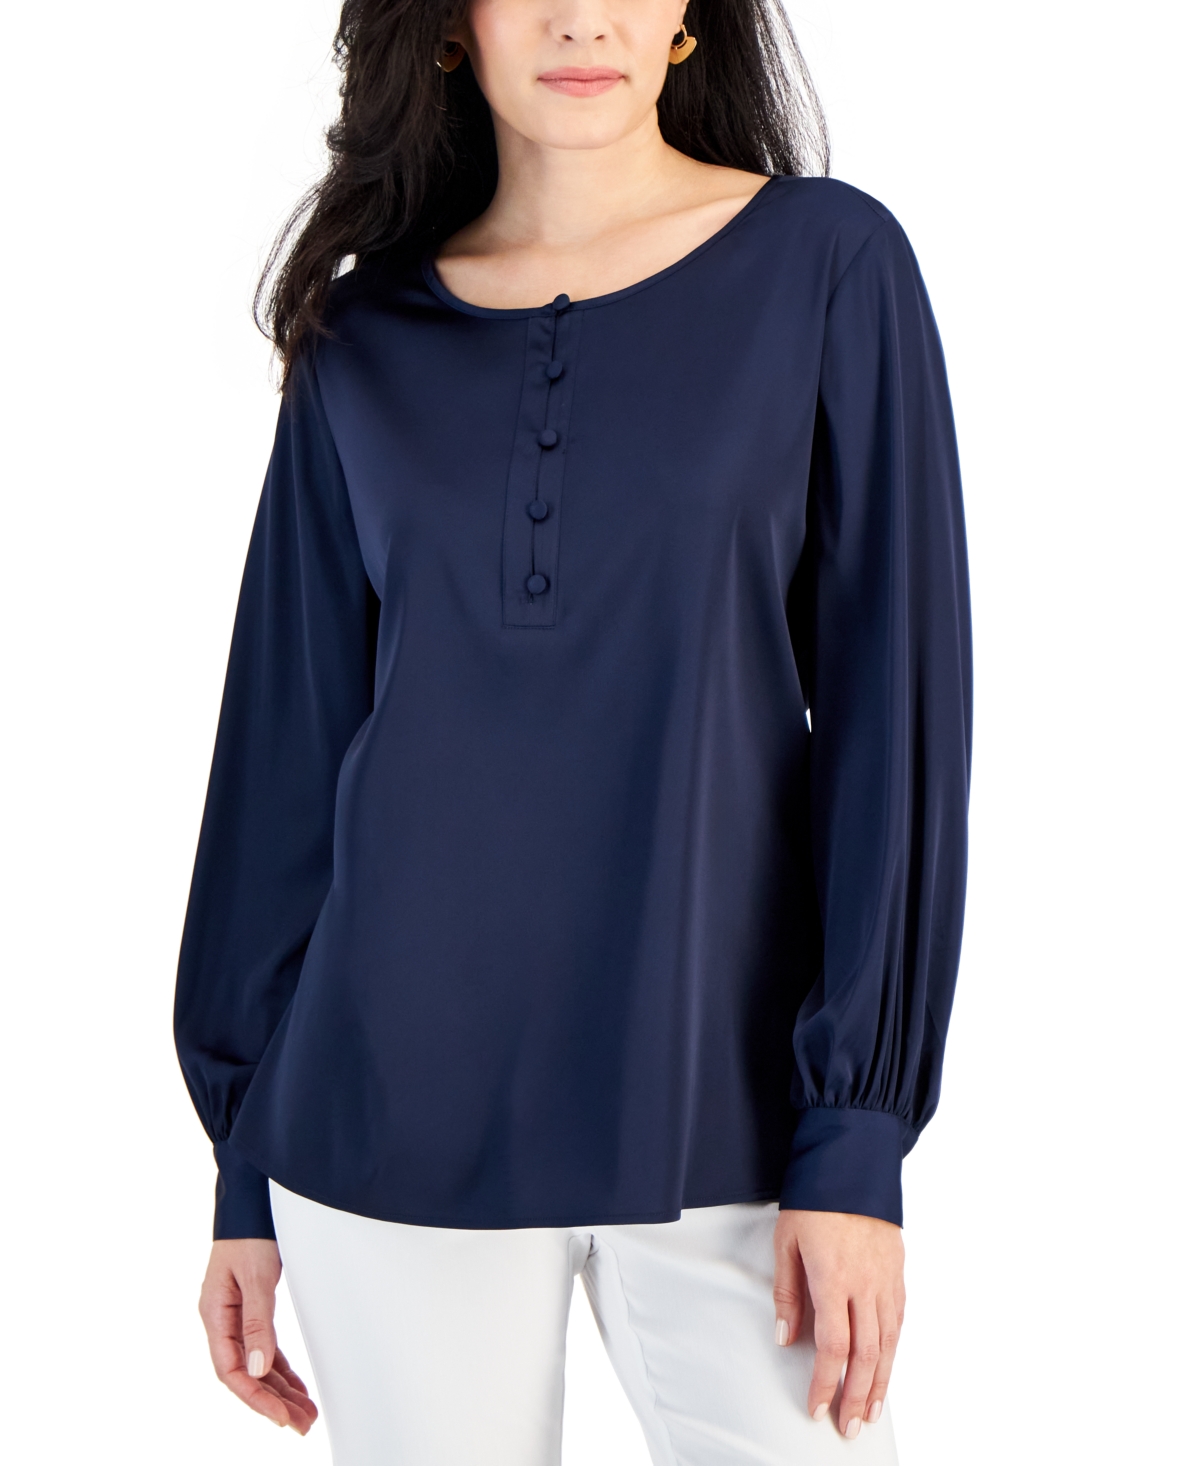 Petite Satin Button-Up Blouse, Created for Macy's - Deep Black